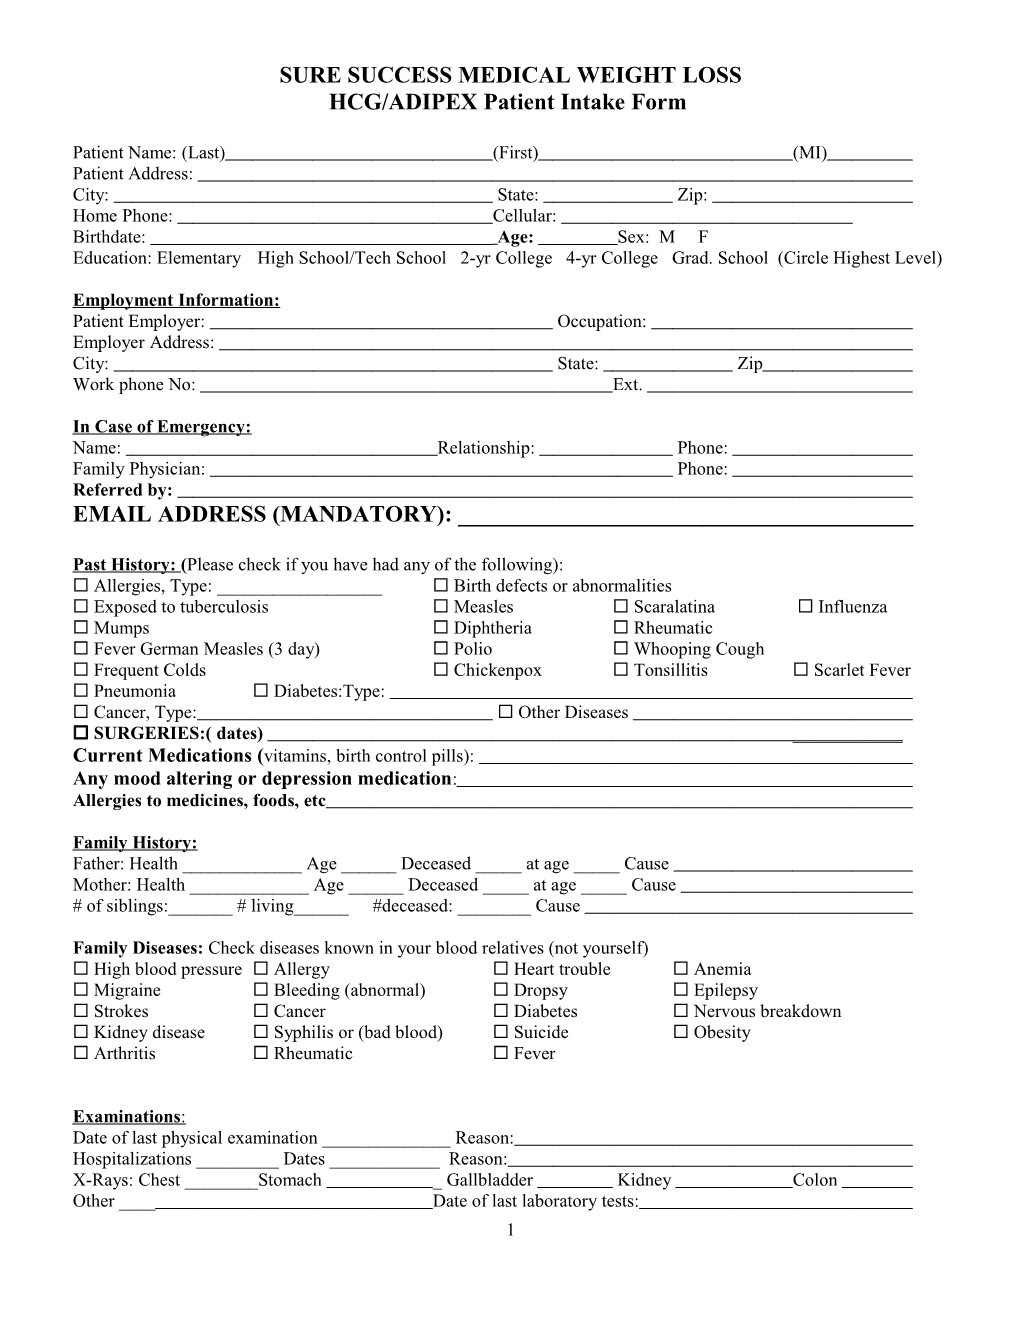 Patient Intake Form Example